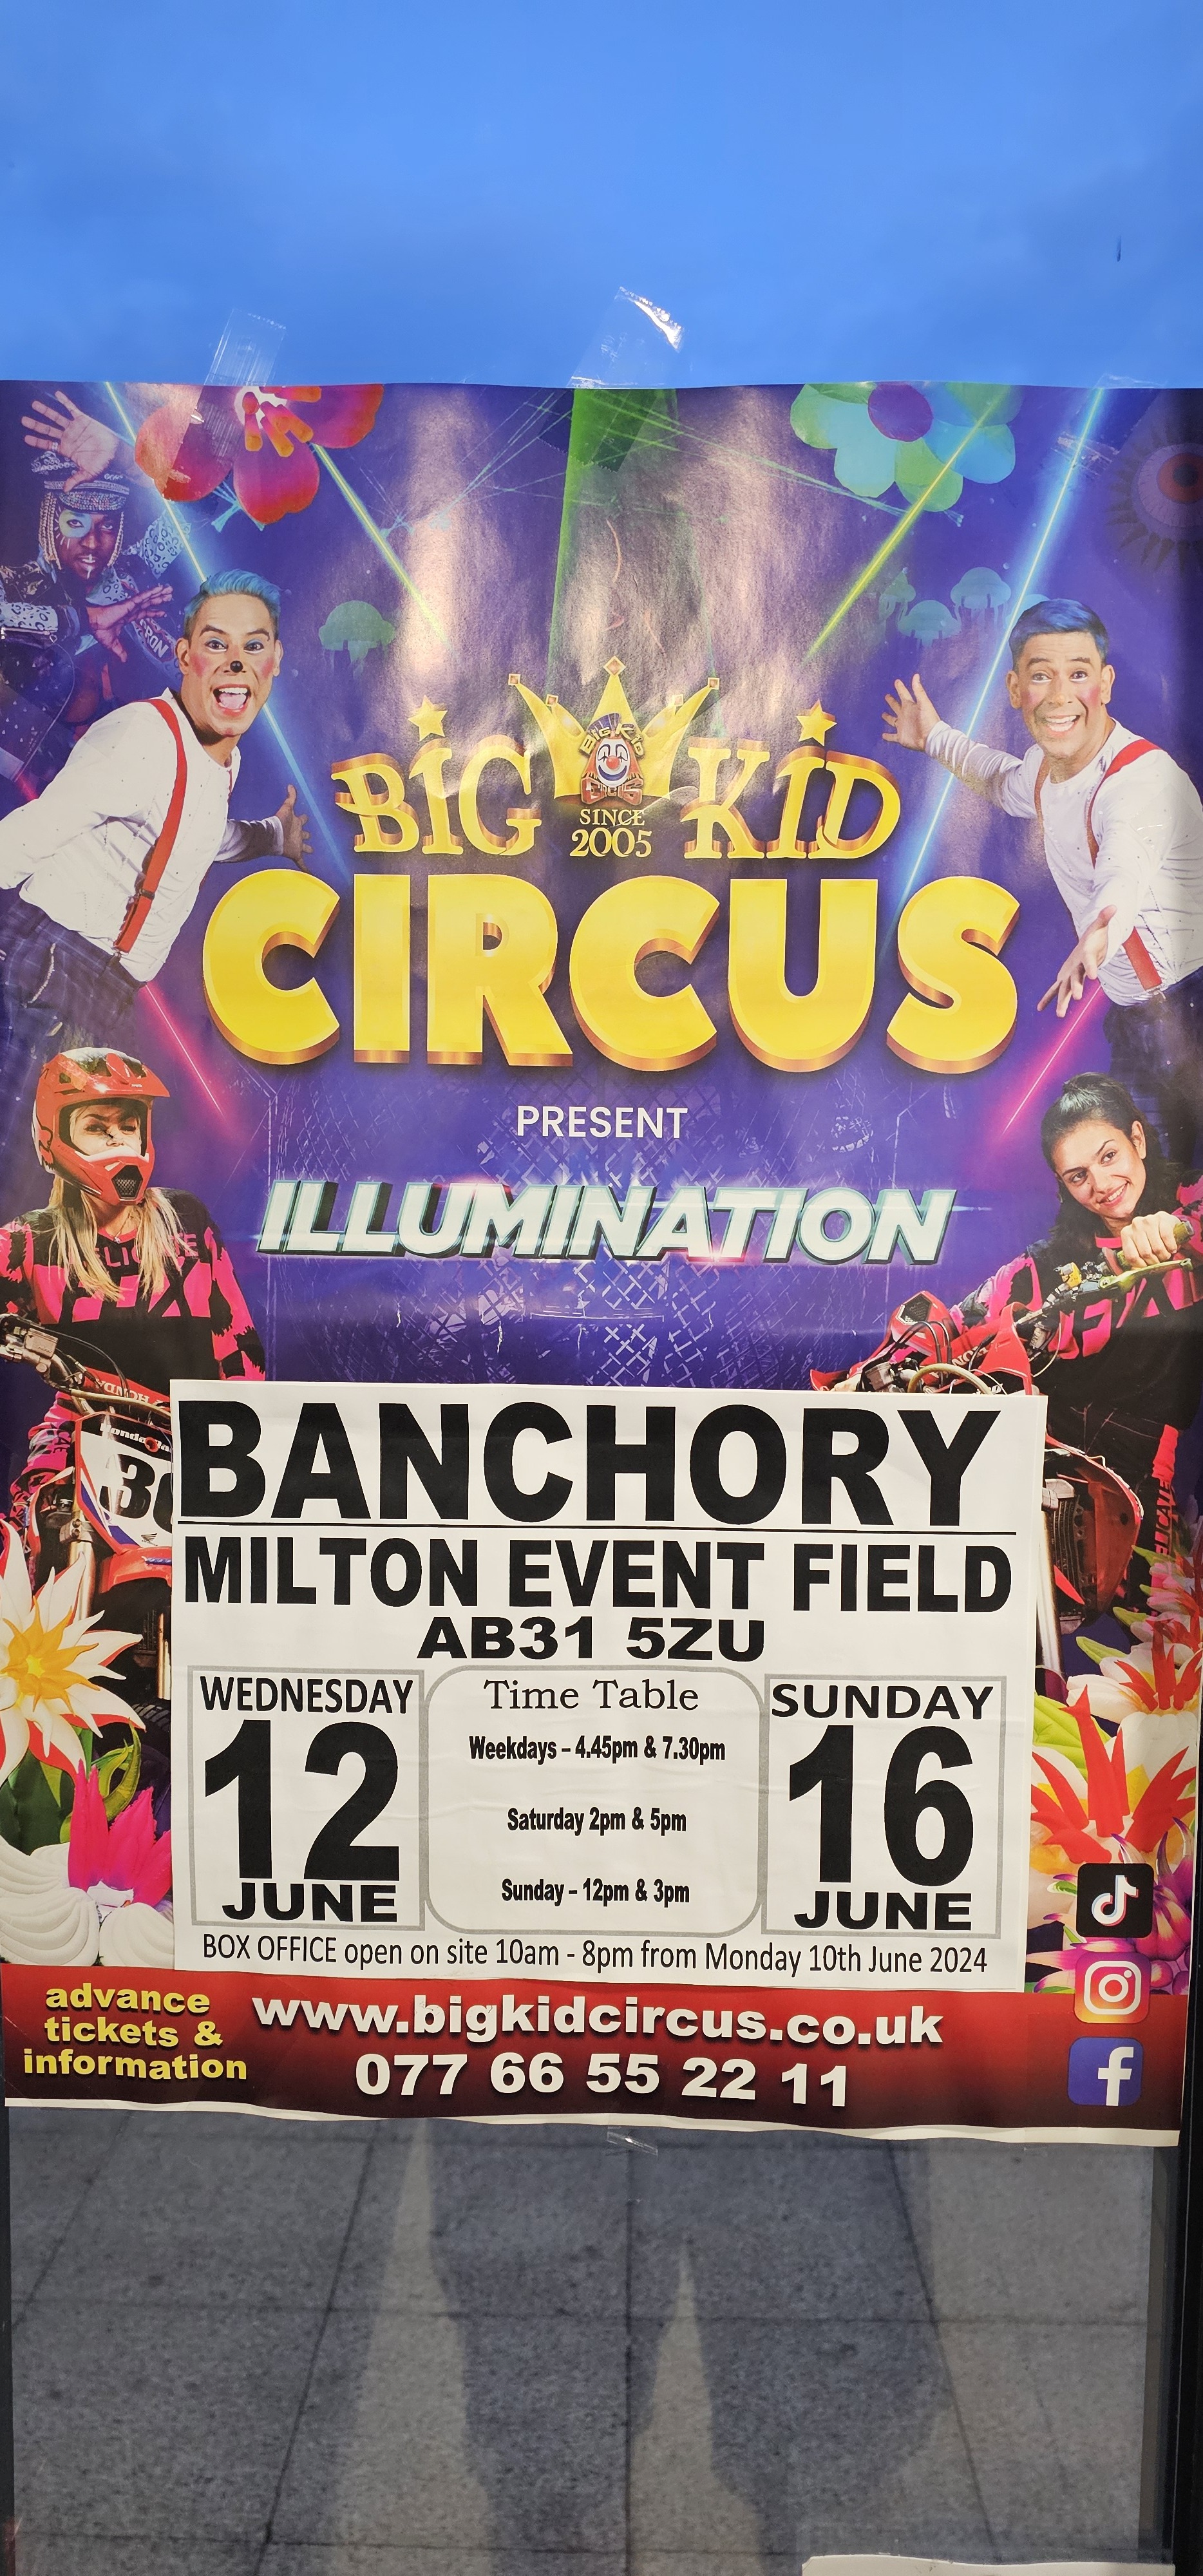 A circus poster with a clown who looks vaguely like Rishi Sunak